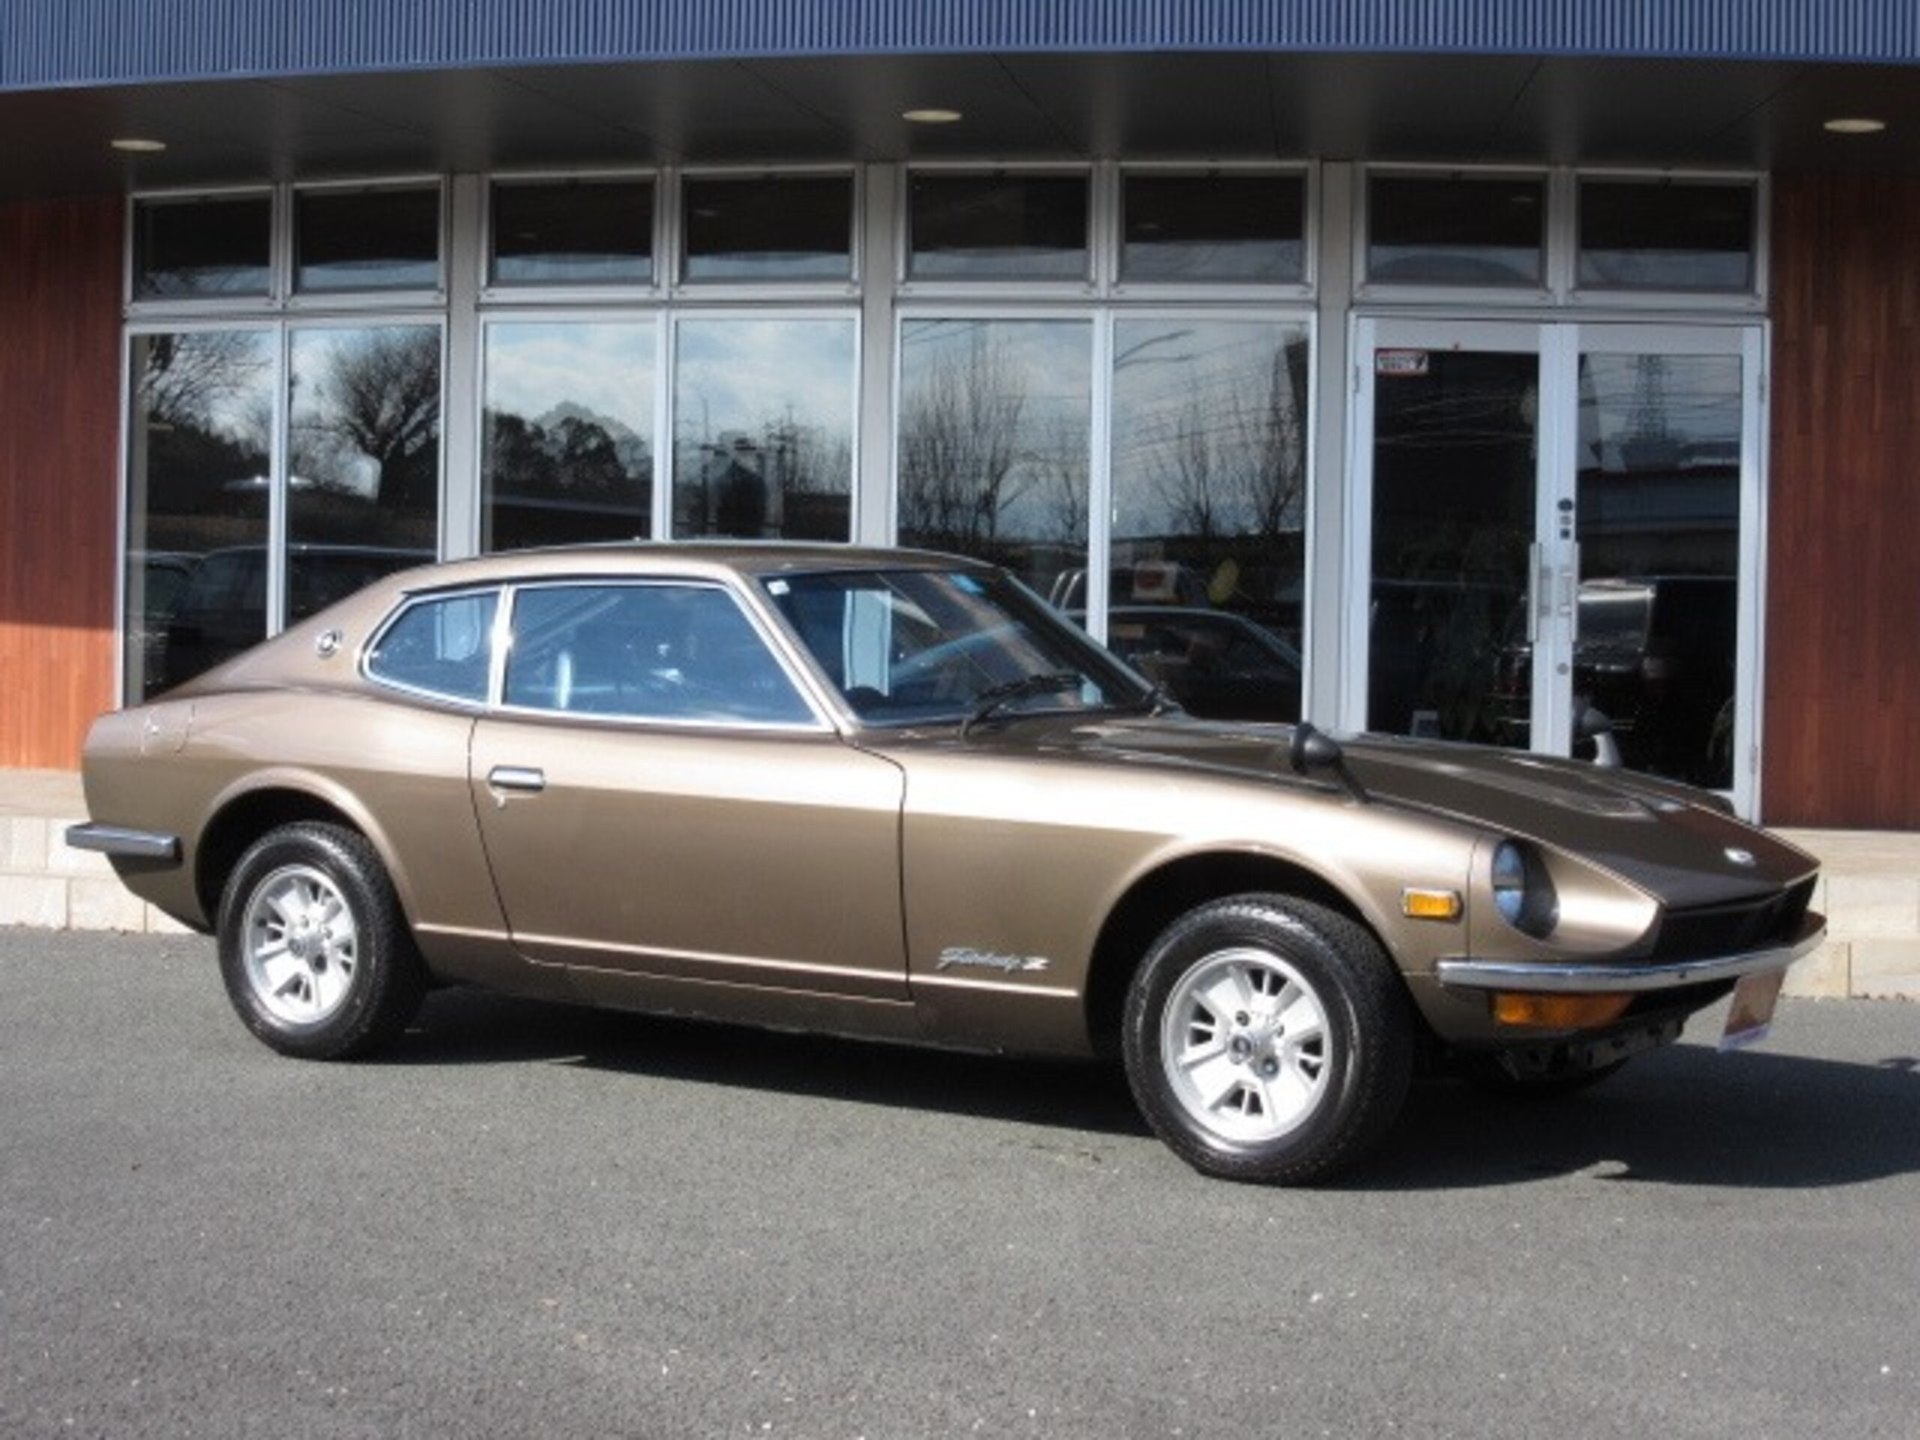 Fairlady Z S30 5mt Fulloriginal Condition Oneowner km 日産 フェアレディzs30z 1オーナー 走行2万9千km 無レストア 無事故 無改造 ブラウン 車両本体価格 999 0万円 日産車中古車紹介 Jdm Nissan Used Car